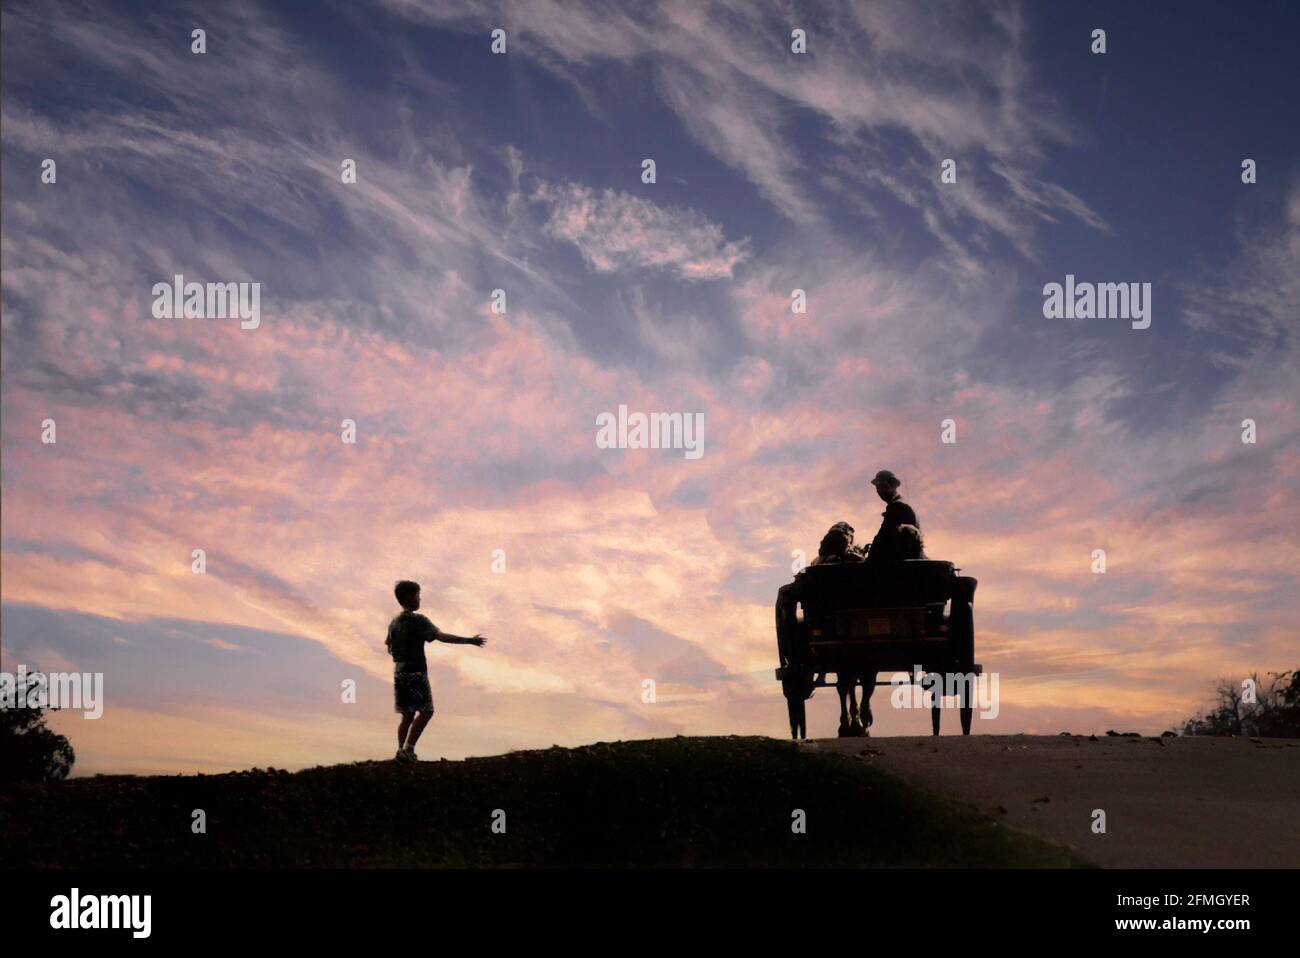 Historical archival 1989 silhouette view of people riding in 80s pony and trap on sunset skyline at brow of incline on the Long Walk in Windsor Great Park with cheeky young boy seemingly thumbing a lift in this1980s archival image in the Royal Park Berkshire England UK Stock Photo